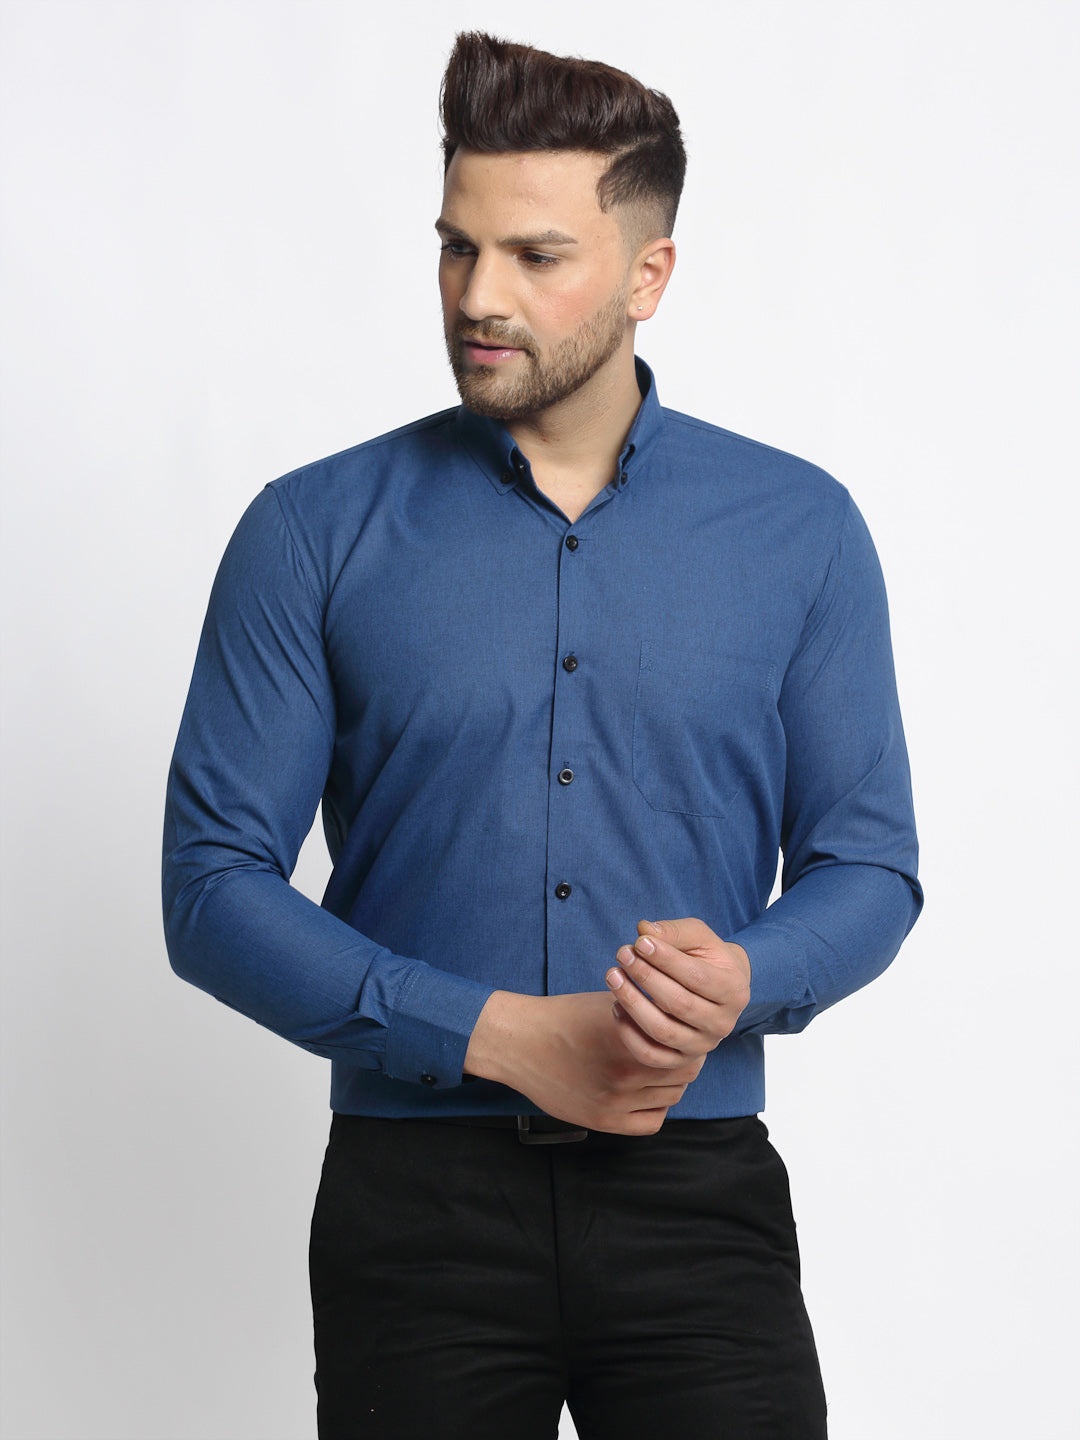 Men's Navy Cotton Solid Button Down Formal Shirts ( SF 734Teal ) - Jainish